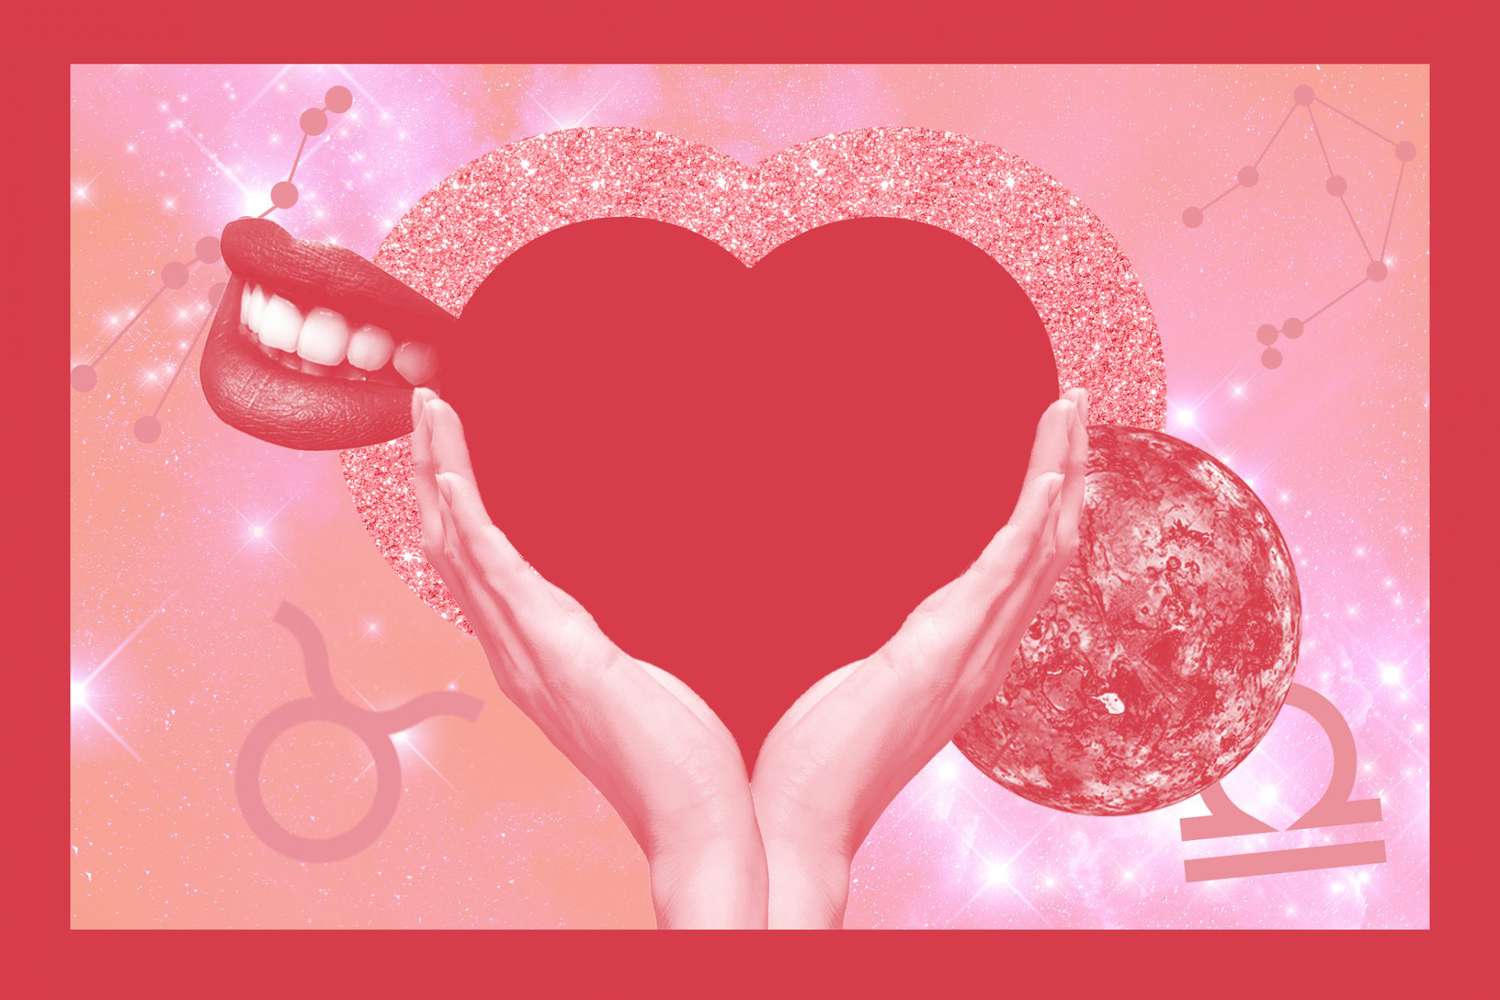 The Ideal Way to Spend Valentine's Day, According to Your Zodiac Sign